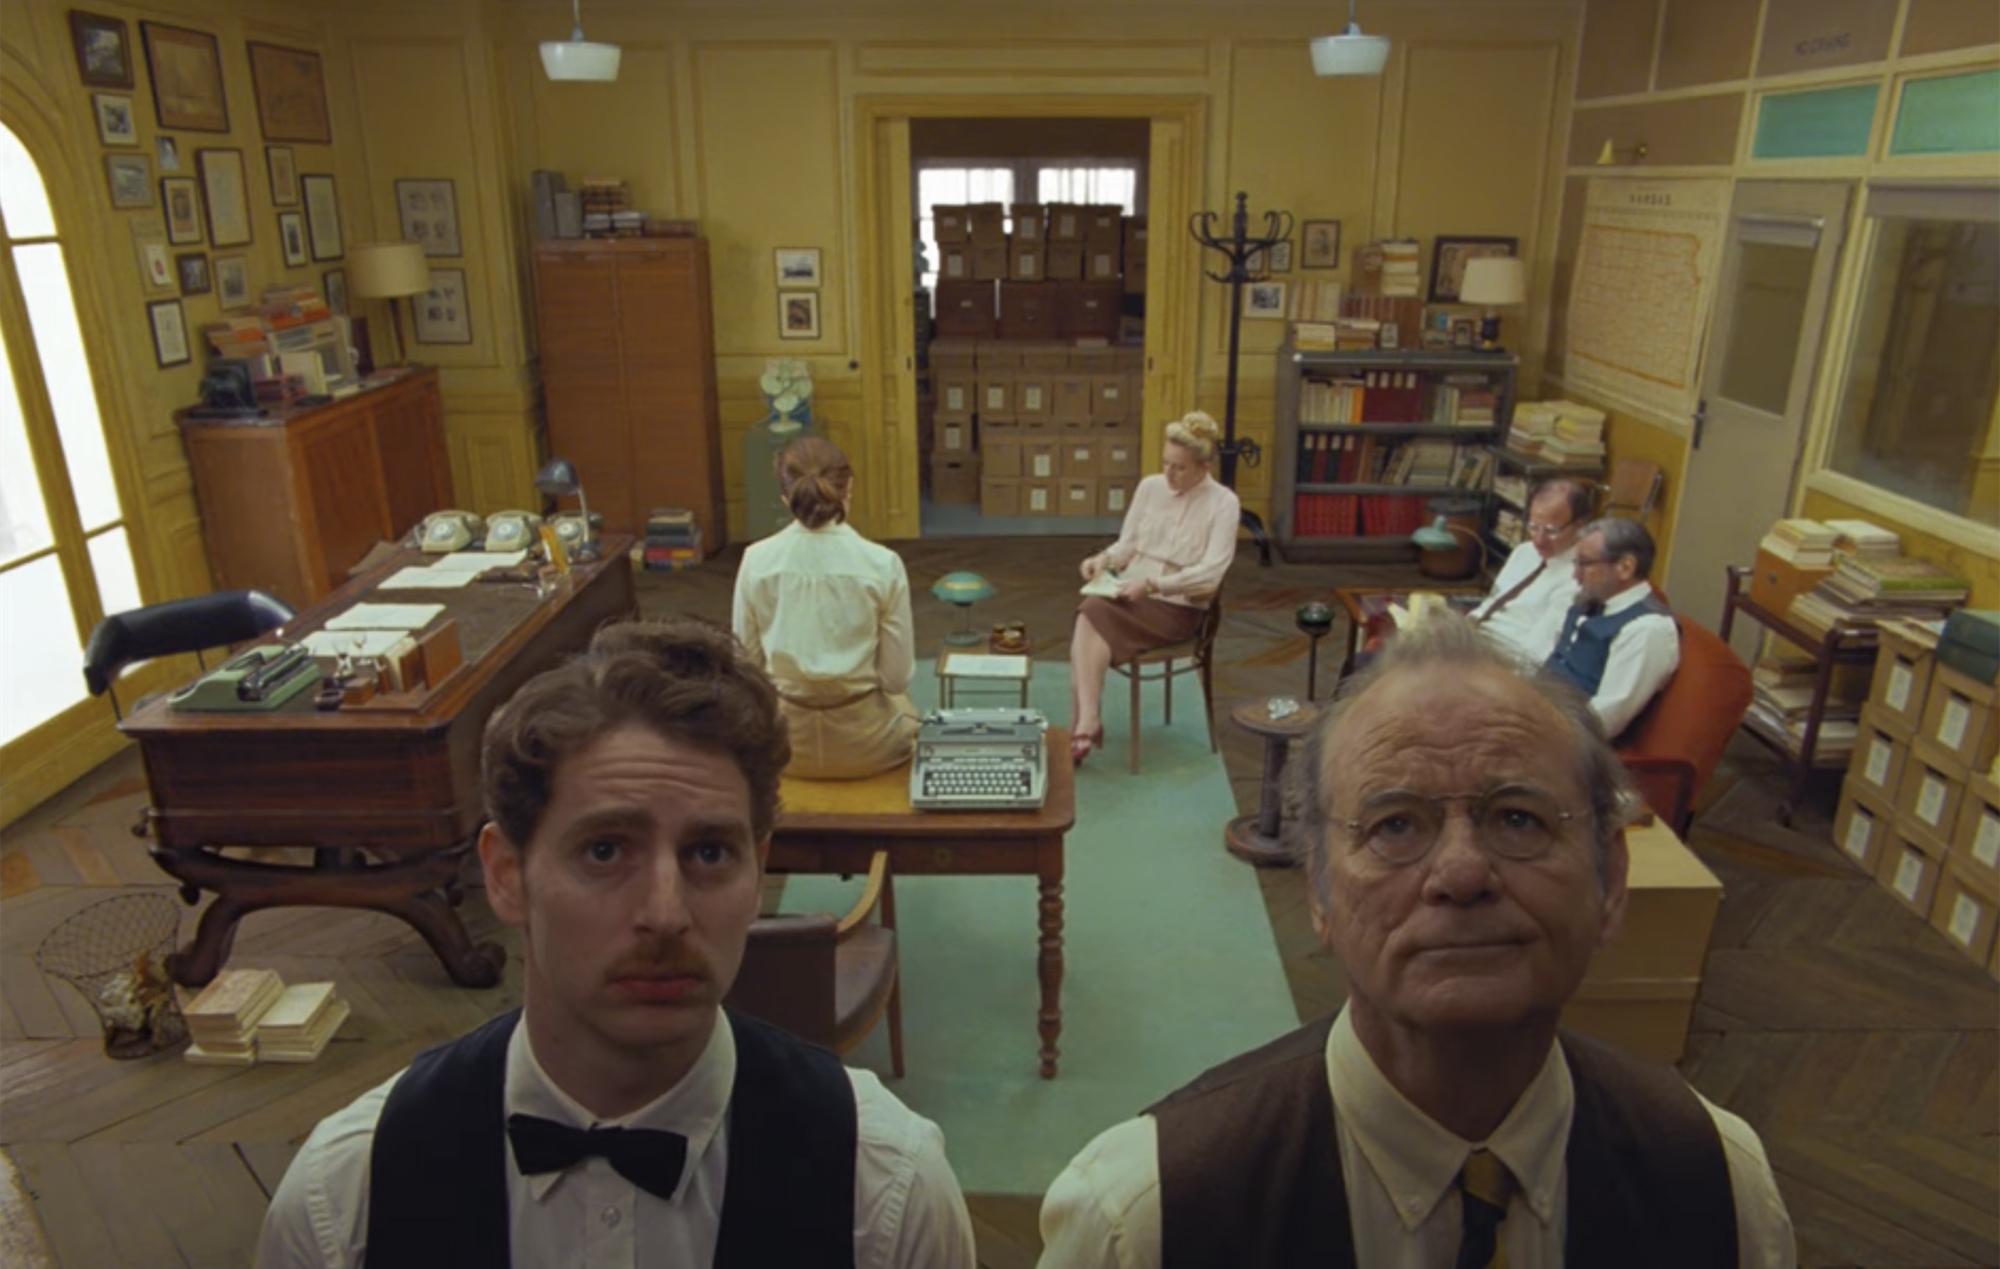 Two men look up at something just above the viewer. In the background, four other people sit in chairs in a secretarial office.